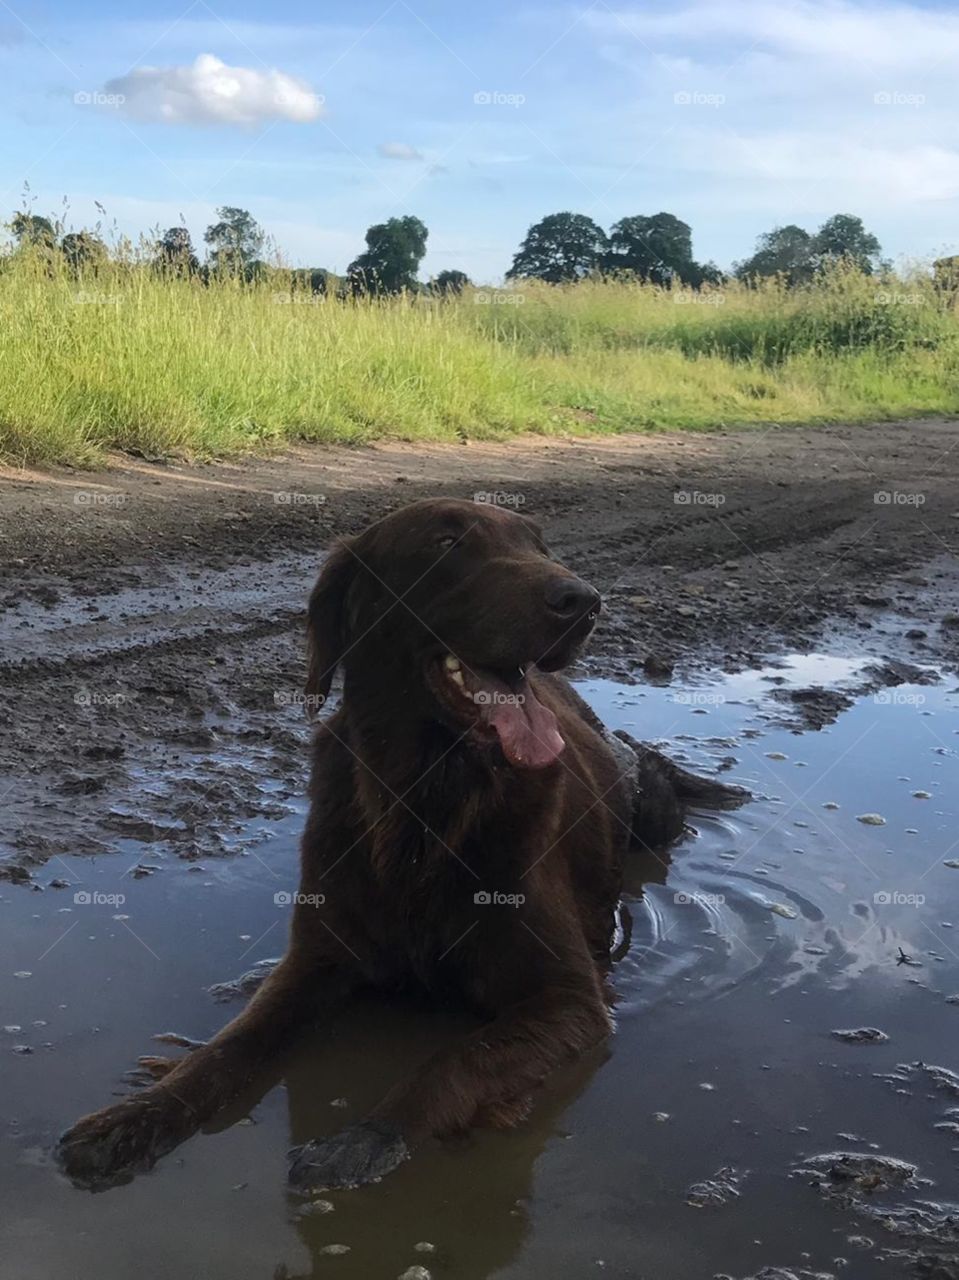 Flatcoat retriever taking a wallow down in the muddies of puddles . Blue sky and grass 